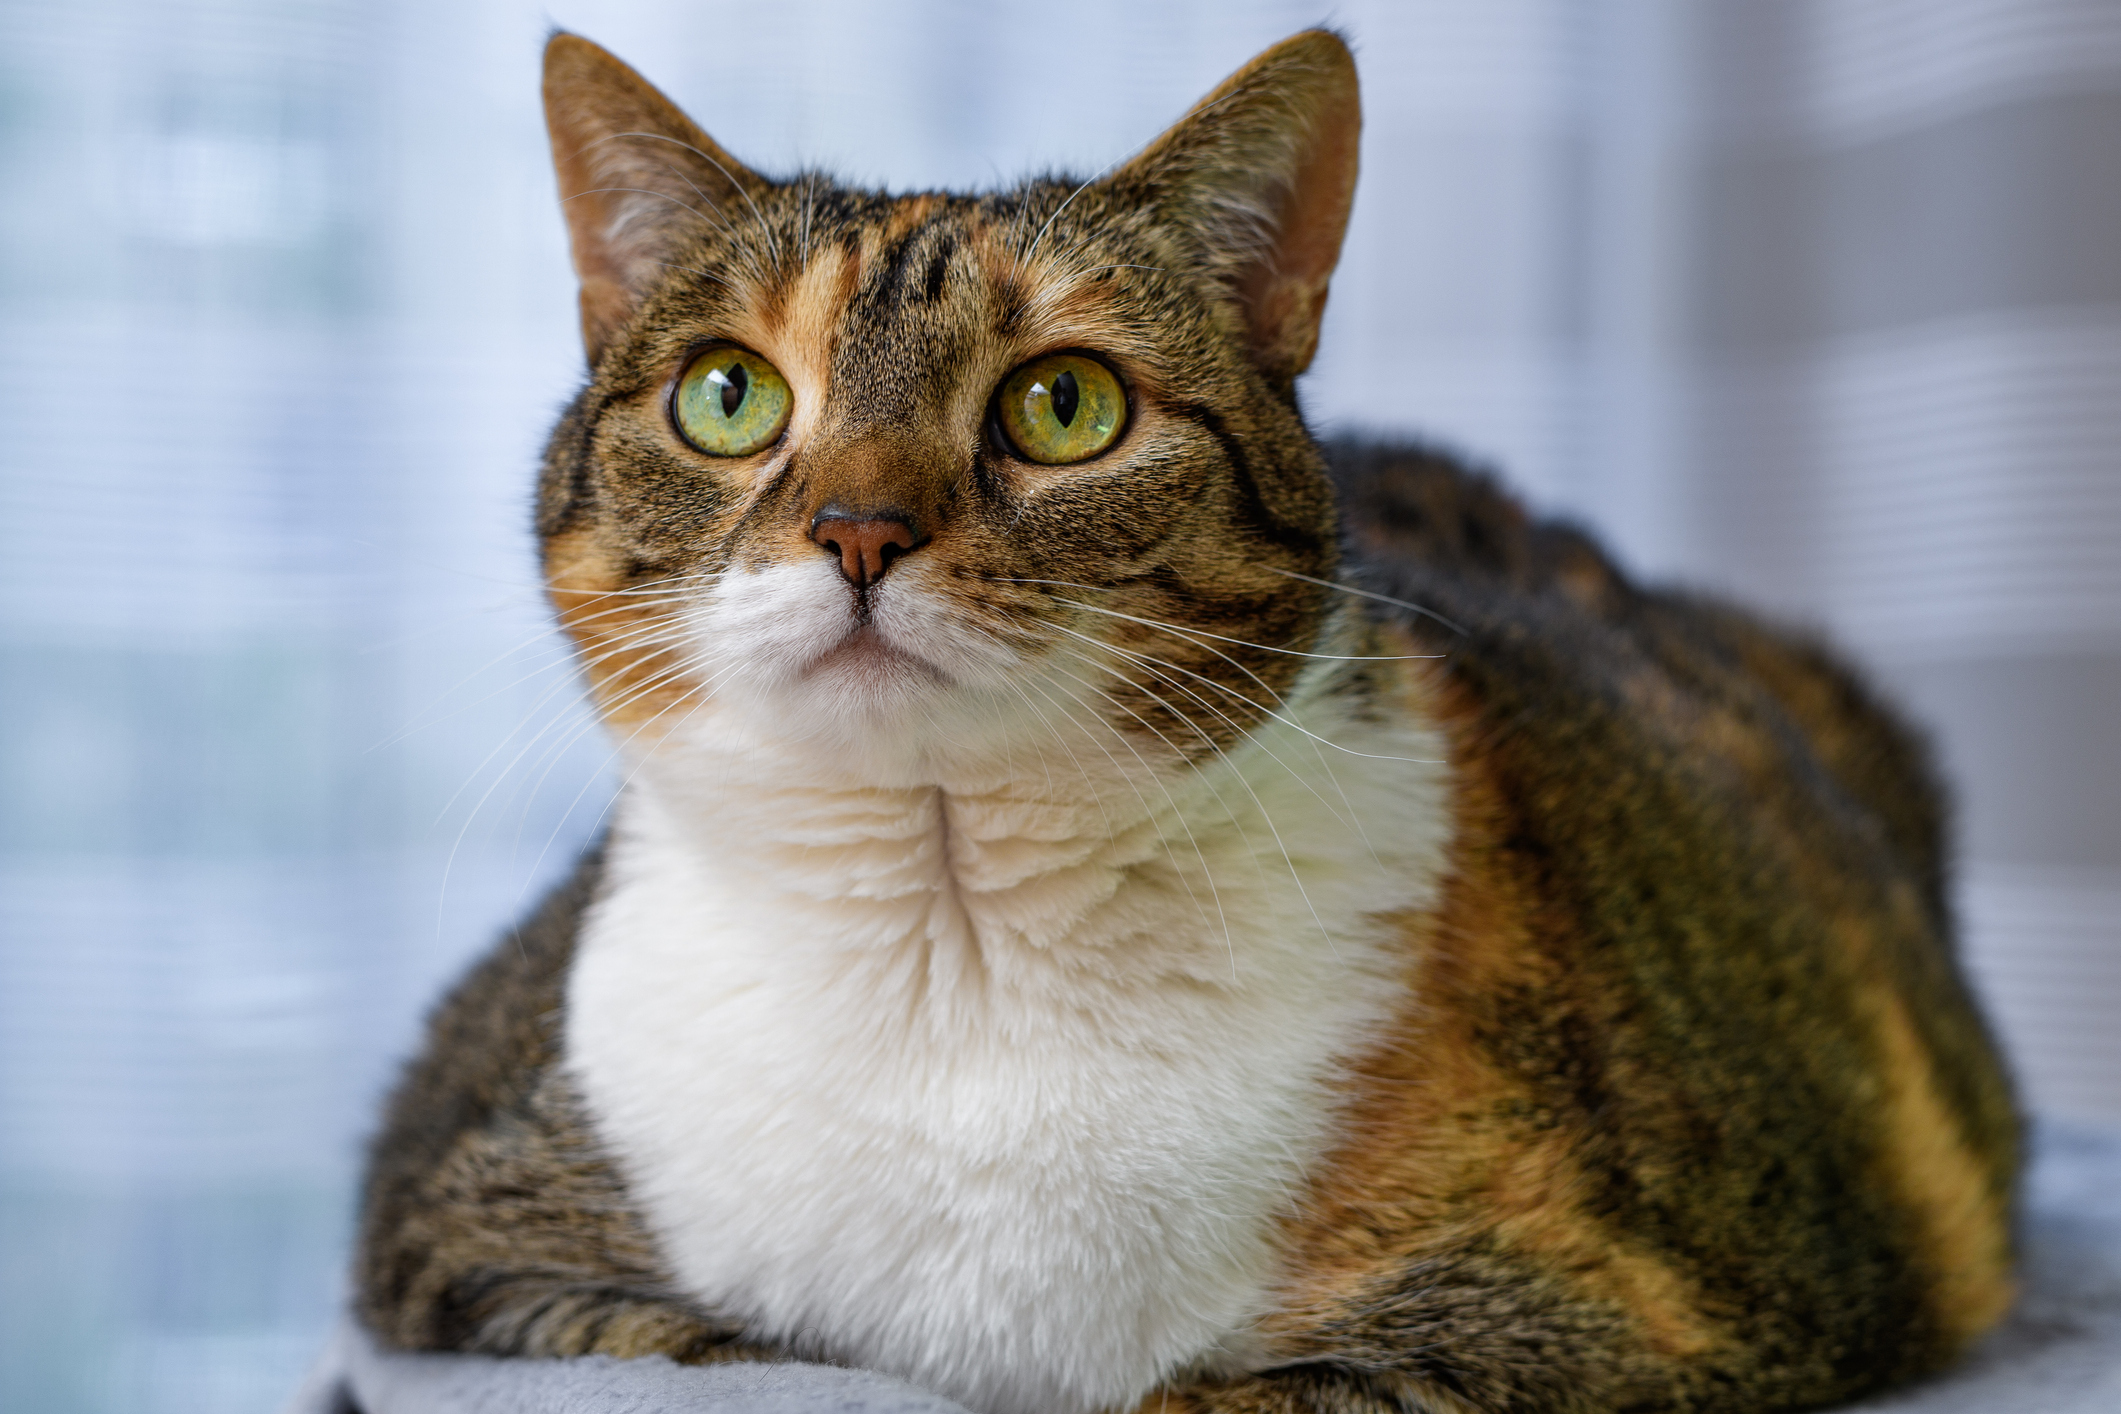 Overweight calico tabby cat looks up with green and gold eyes. 